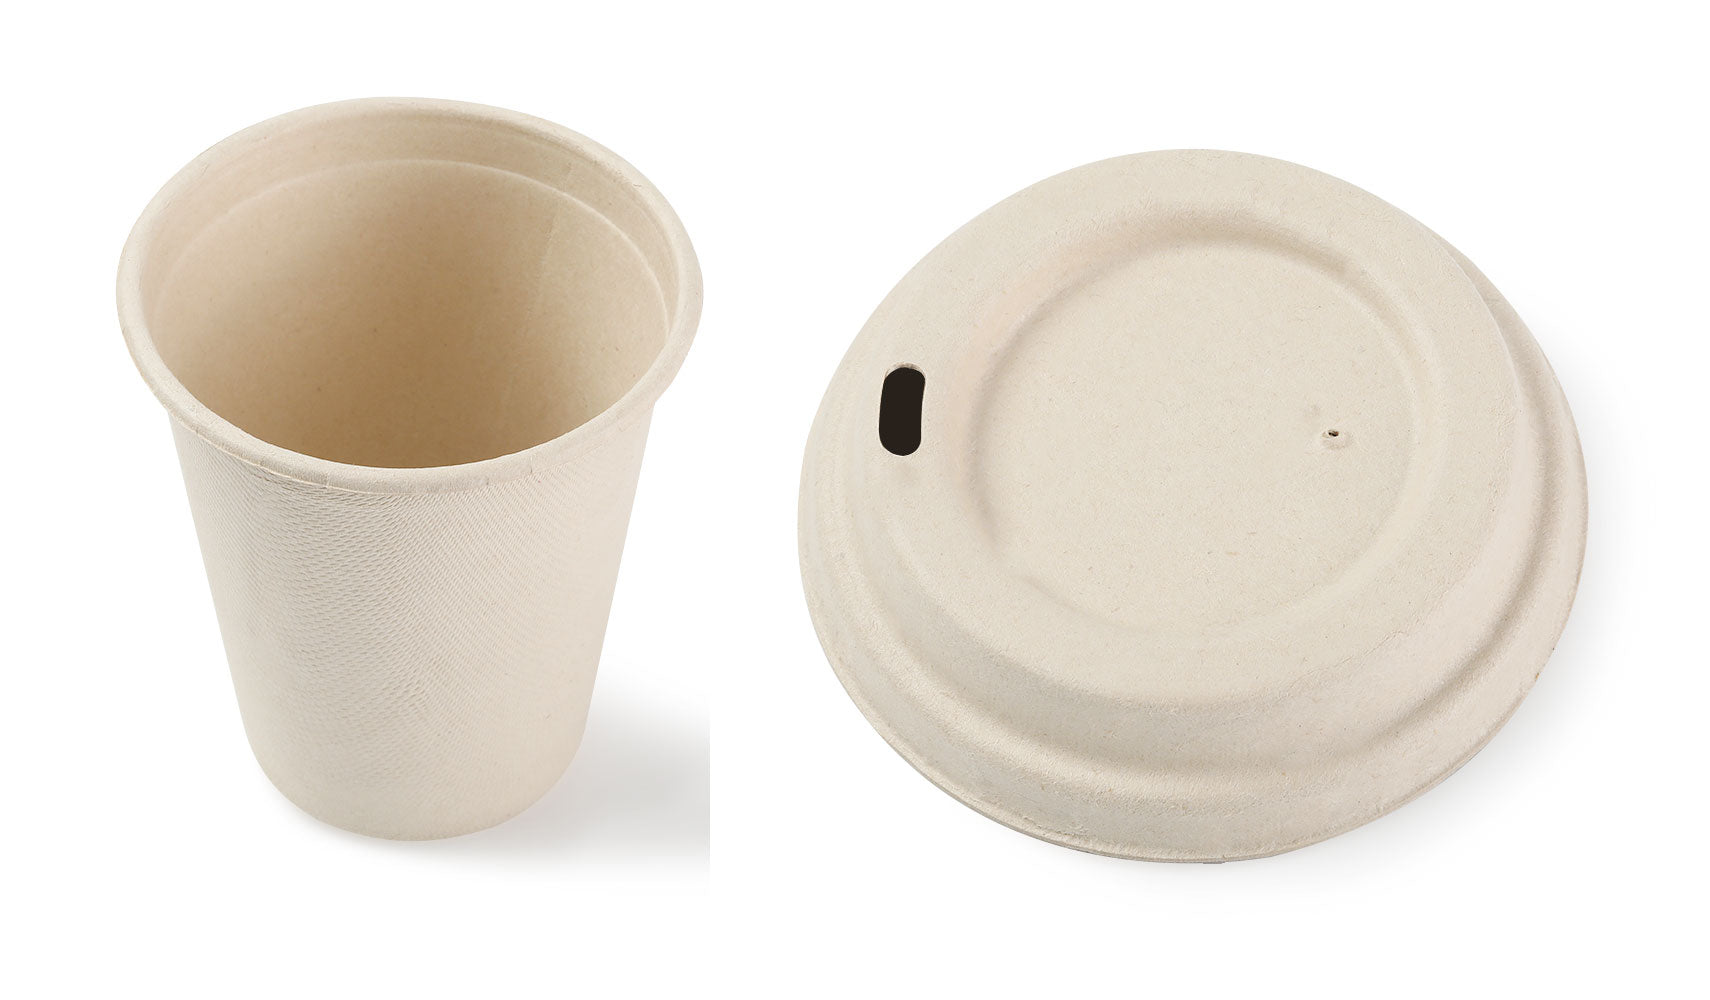 Vivid EcoCup Bamboo Biodegradable Cups (Vivid by Pearson)